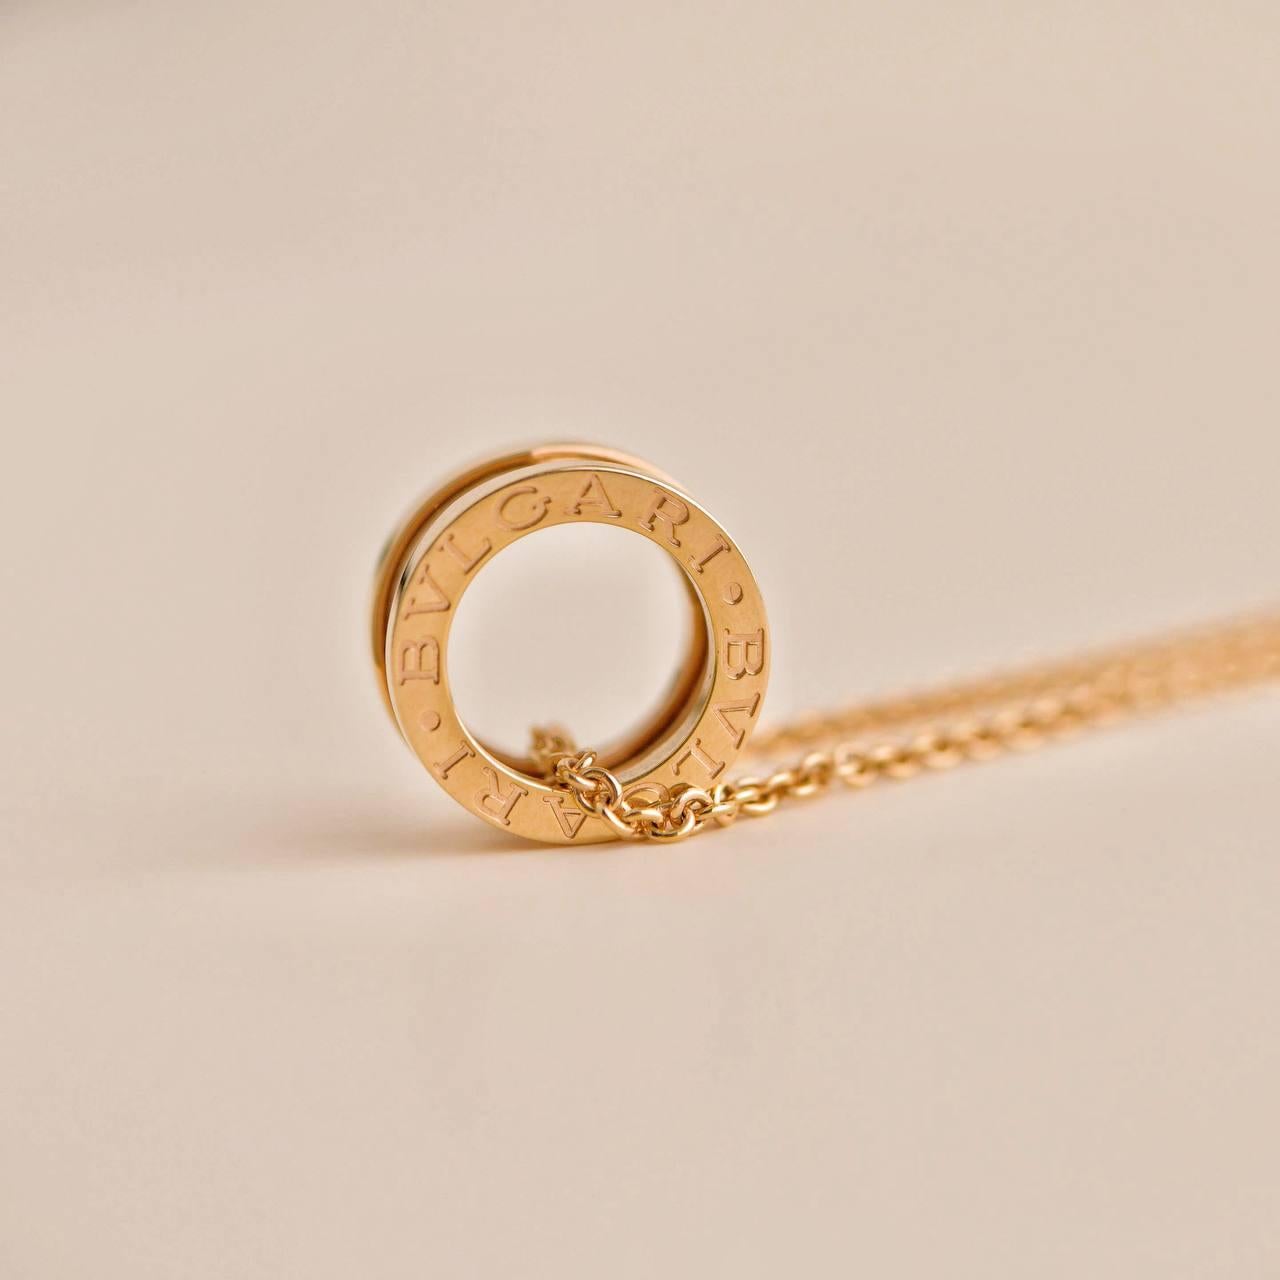 BVLGARI B.ZERO1 Necklace In 18k Yellow Gold In Excellent Condition For Sale In Banbury, GB